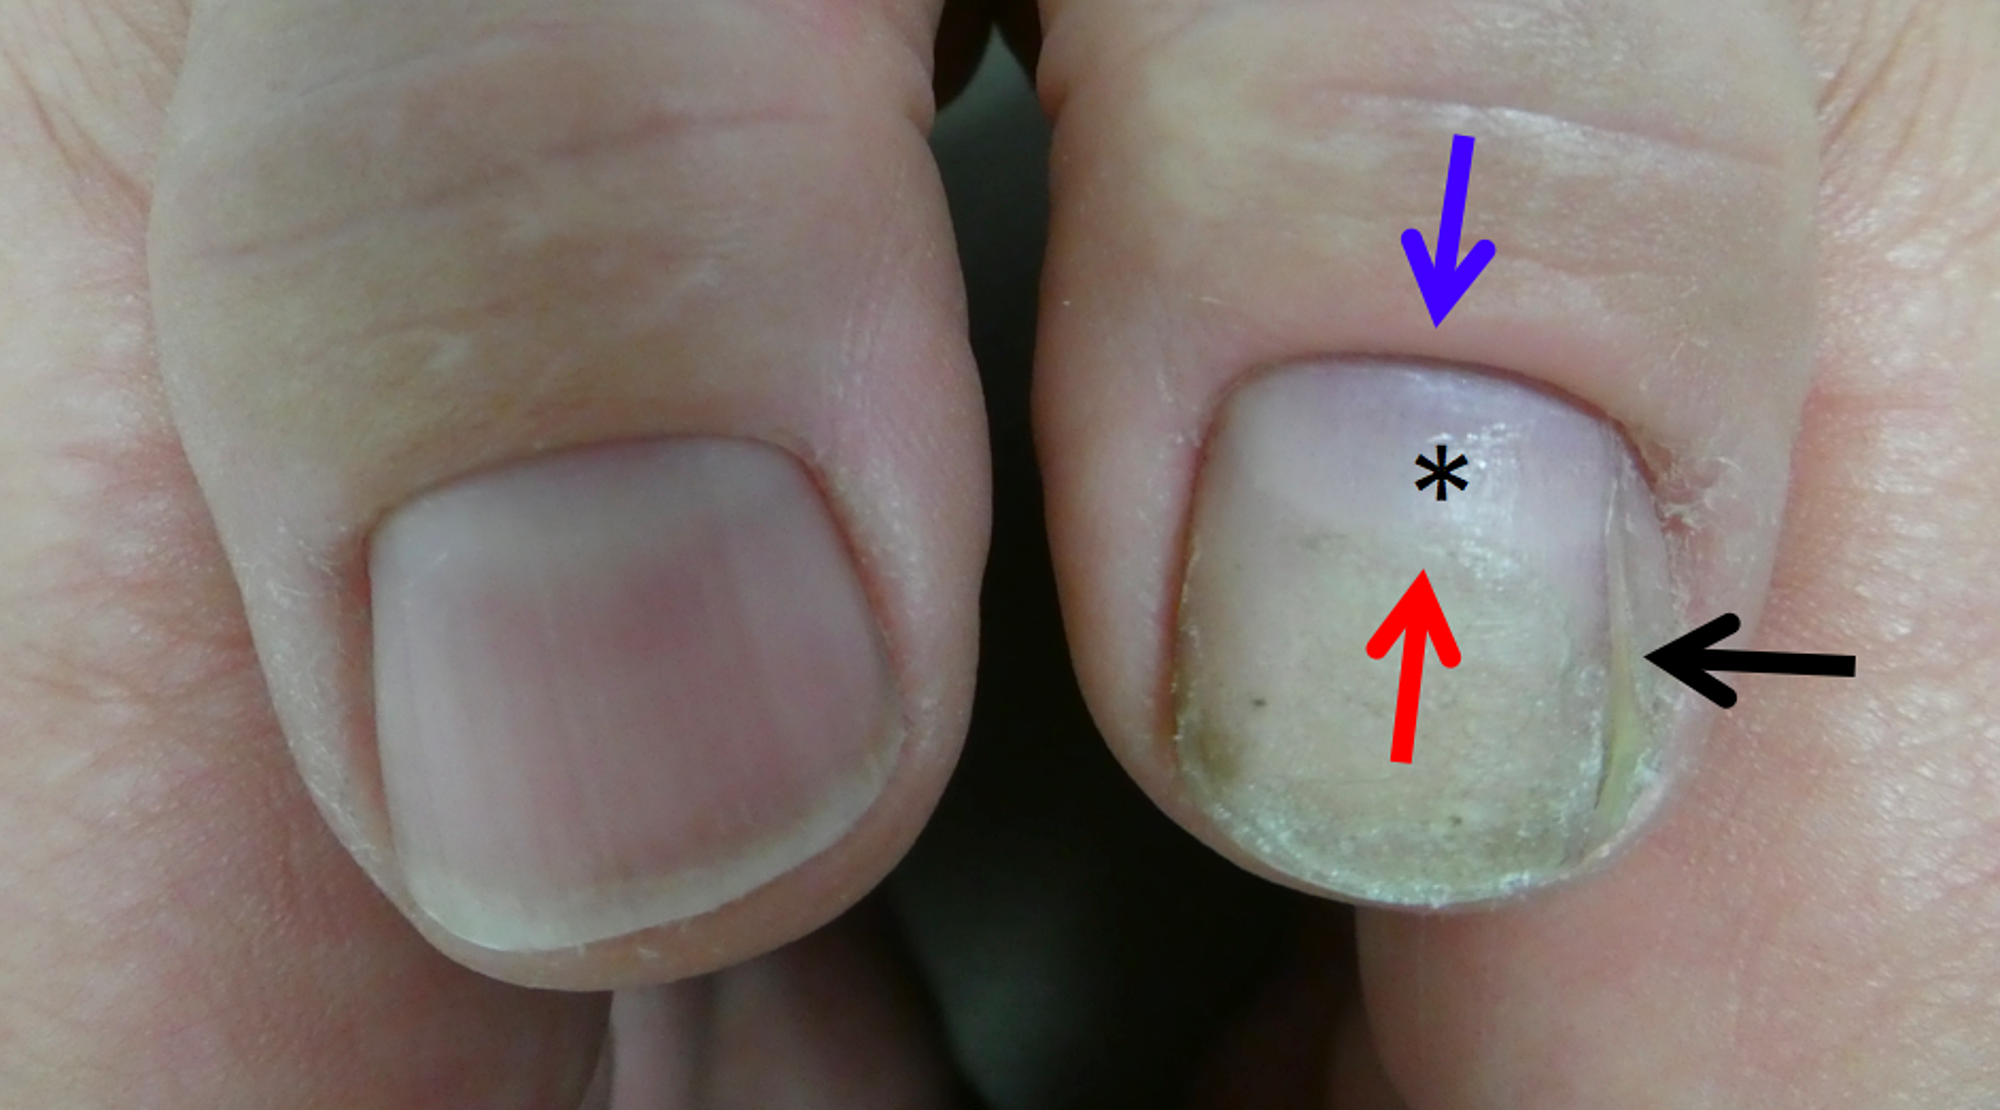 Cureus | Macrolunula: Case Reports of Patients with Trauma-associated  Enlarged Lunula and a Concise Review of this Nail Finding | Article